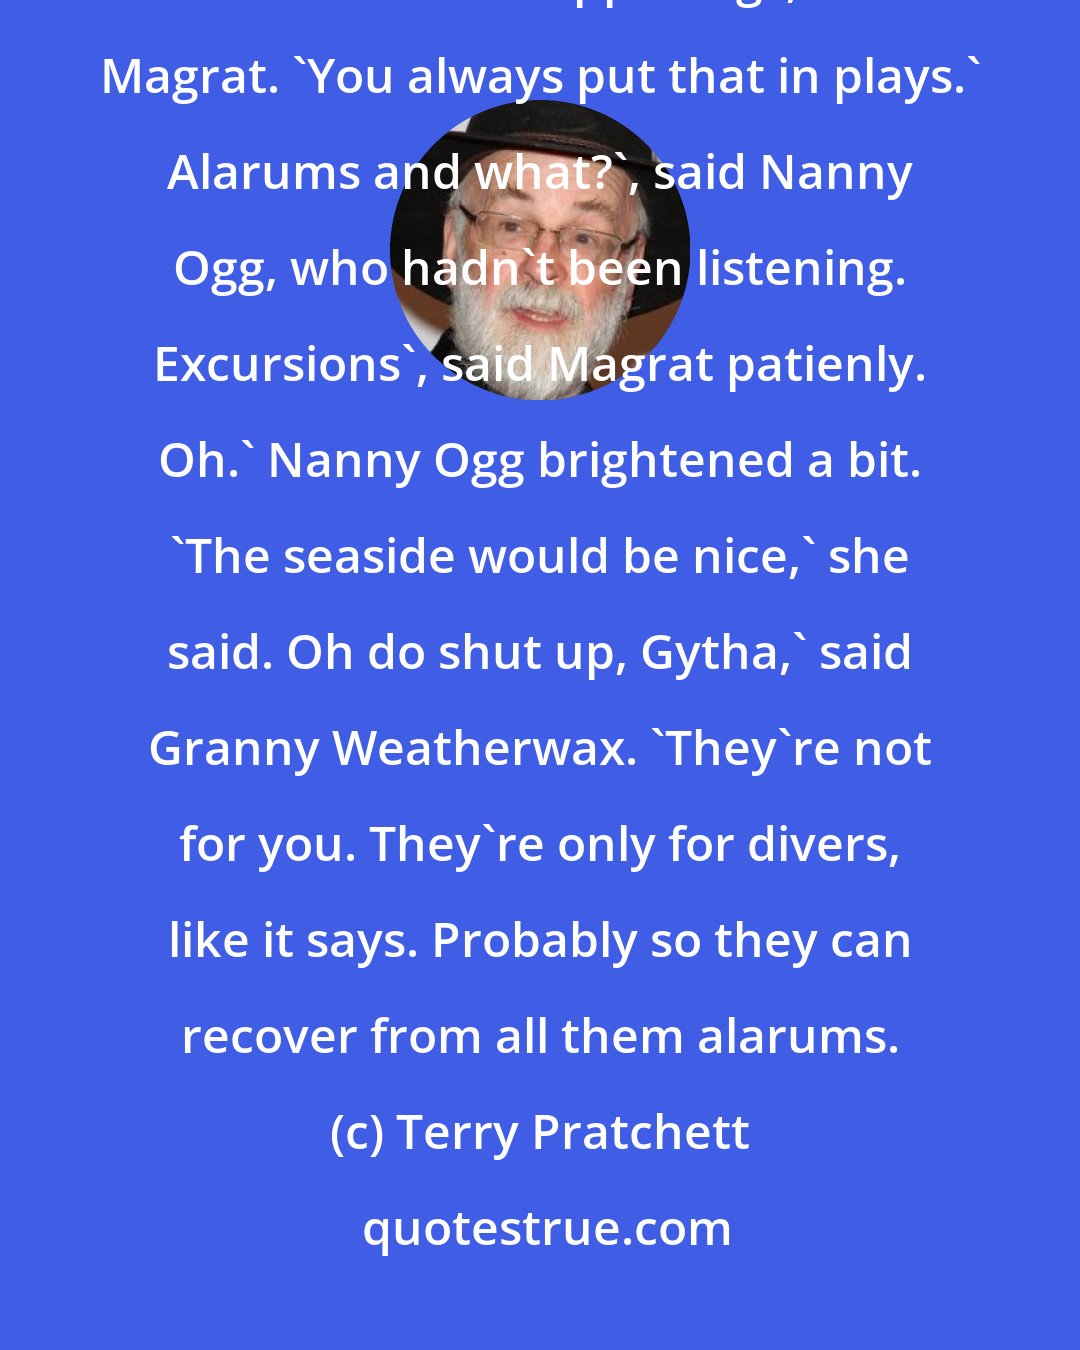 Terry Pratchett: Divers alarums and excursions', she read, uncertainly. 'That means lots of terrible happenings, said Magrat. 'You always put that in plays.' Alarums and what?', said Nanny Ogg, who hadn't been listening. Excursions', said Magrat patienly. Oh.' Nanny Ogg brightened a bit. 'The seaside would be nice,' she said. Oh do shut up, Gytha,' said Granny Weatherwax. 'They're not for you. They're only for divers, like it says. Probably so they can recover from all them alarums.